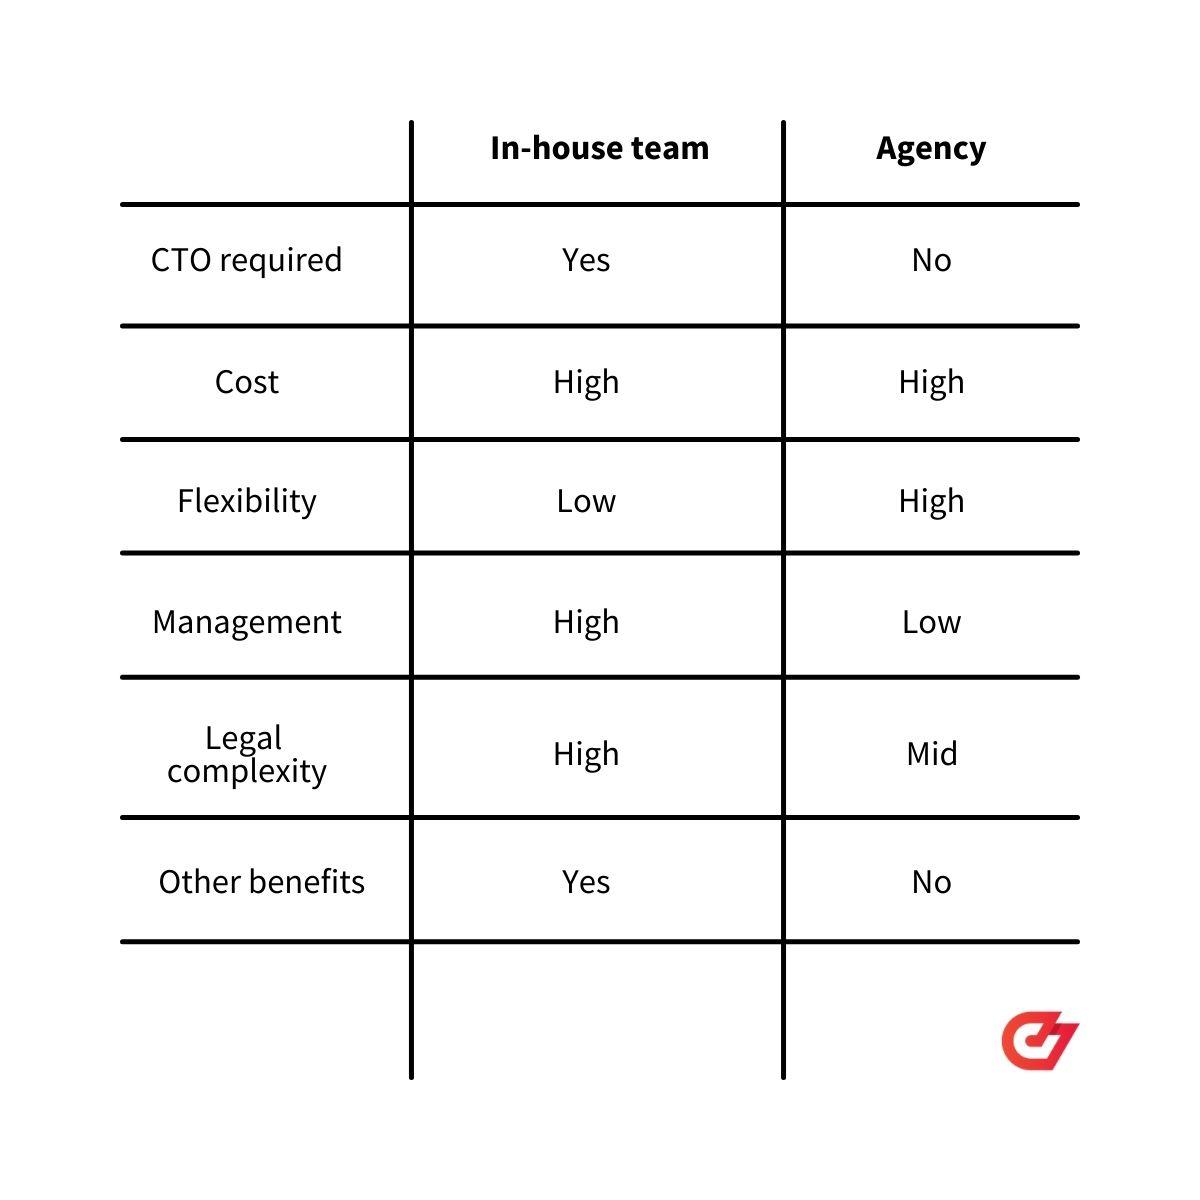 The pros and cons of hiring an agency vs. in-house developers